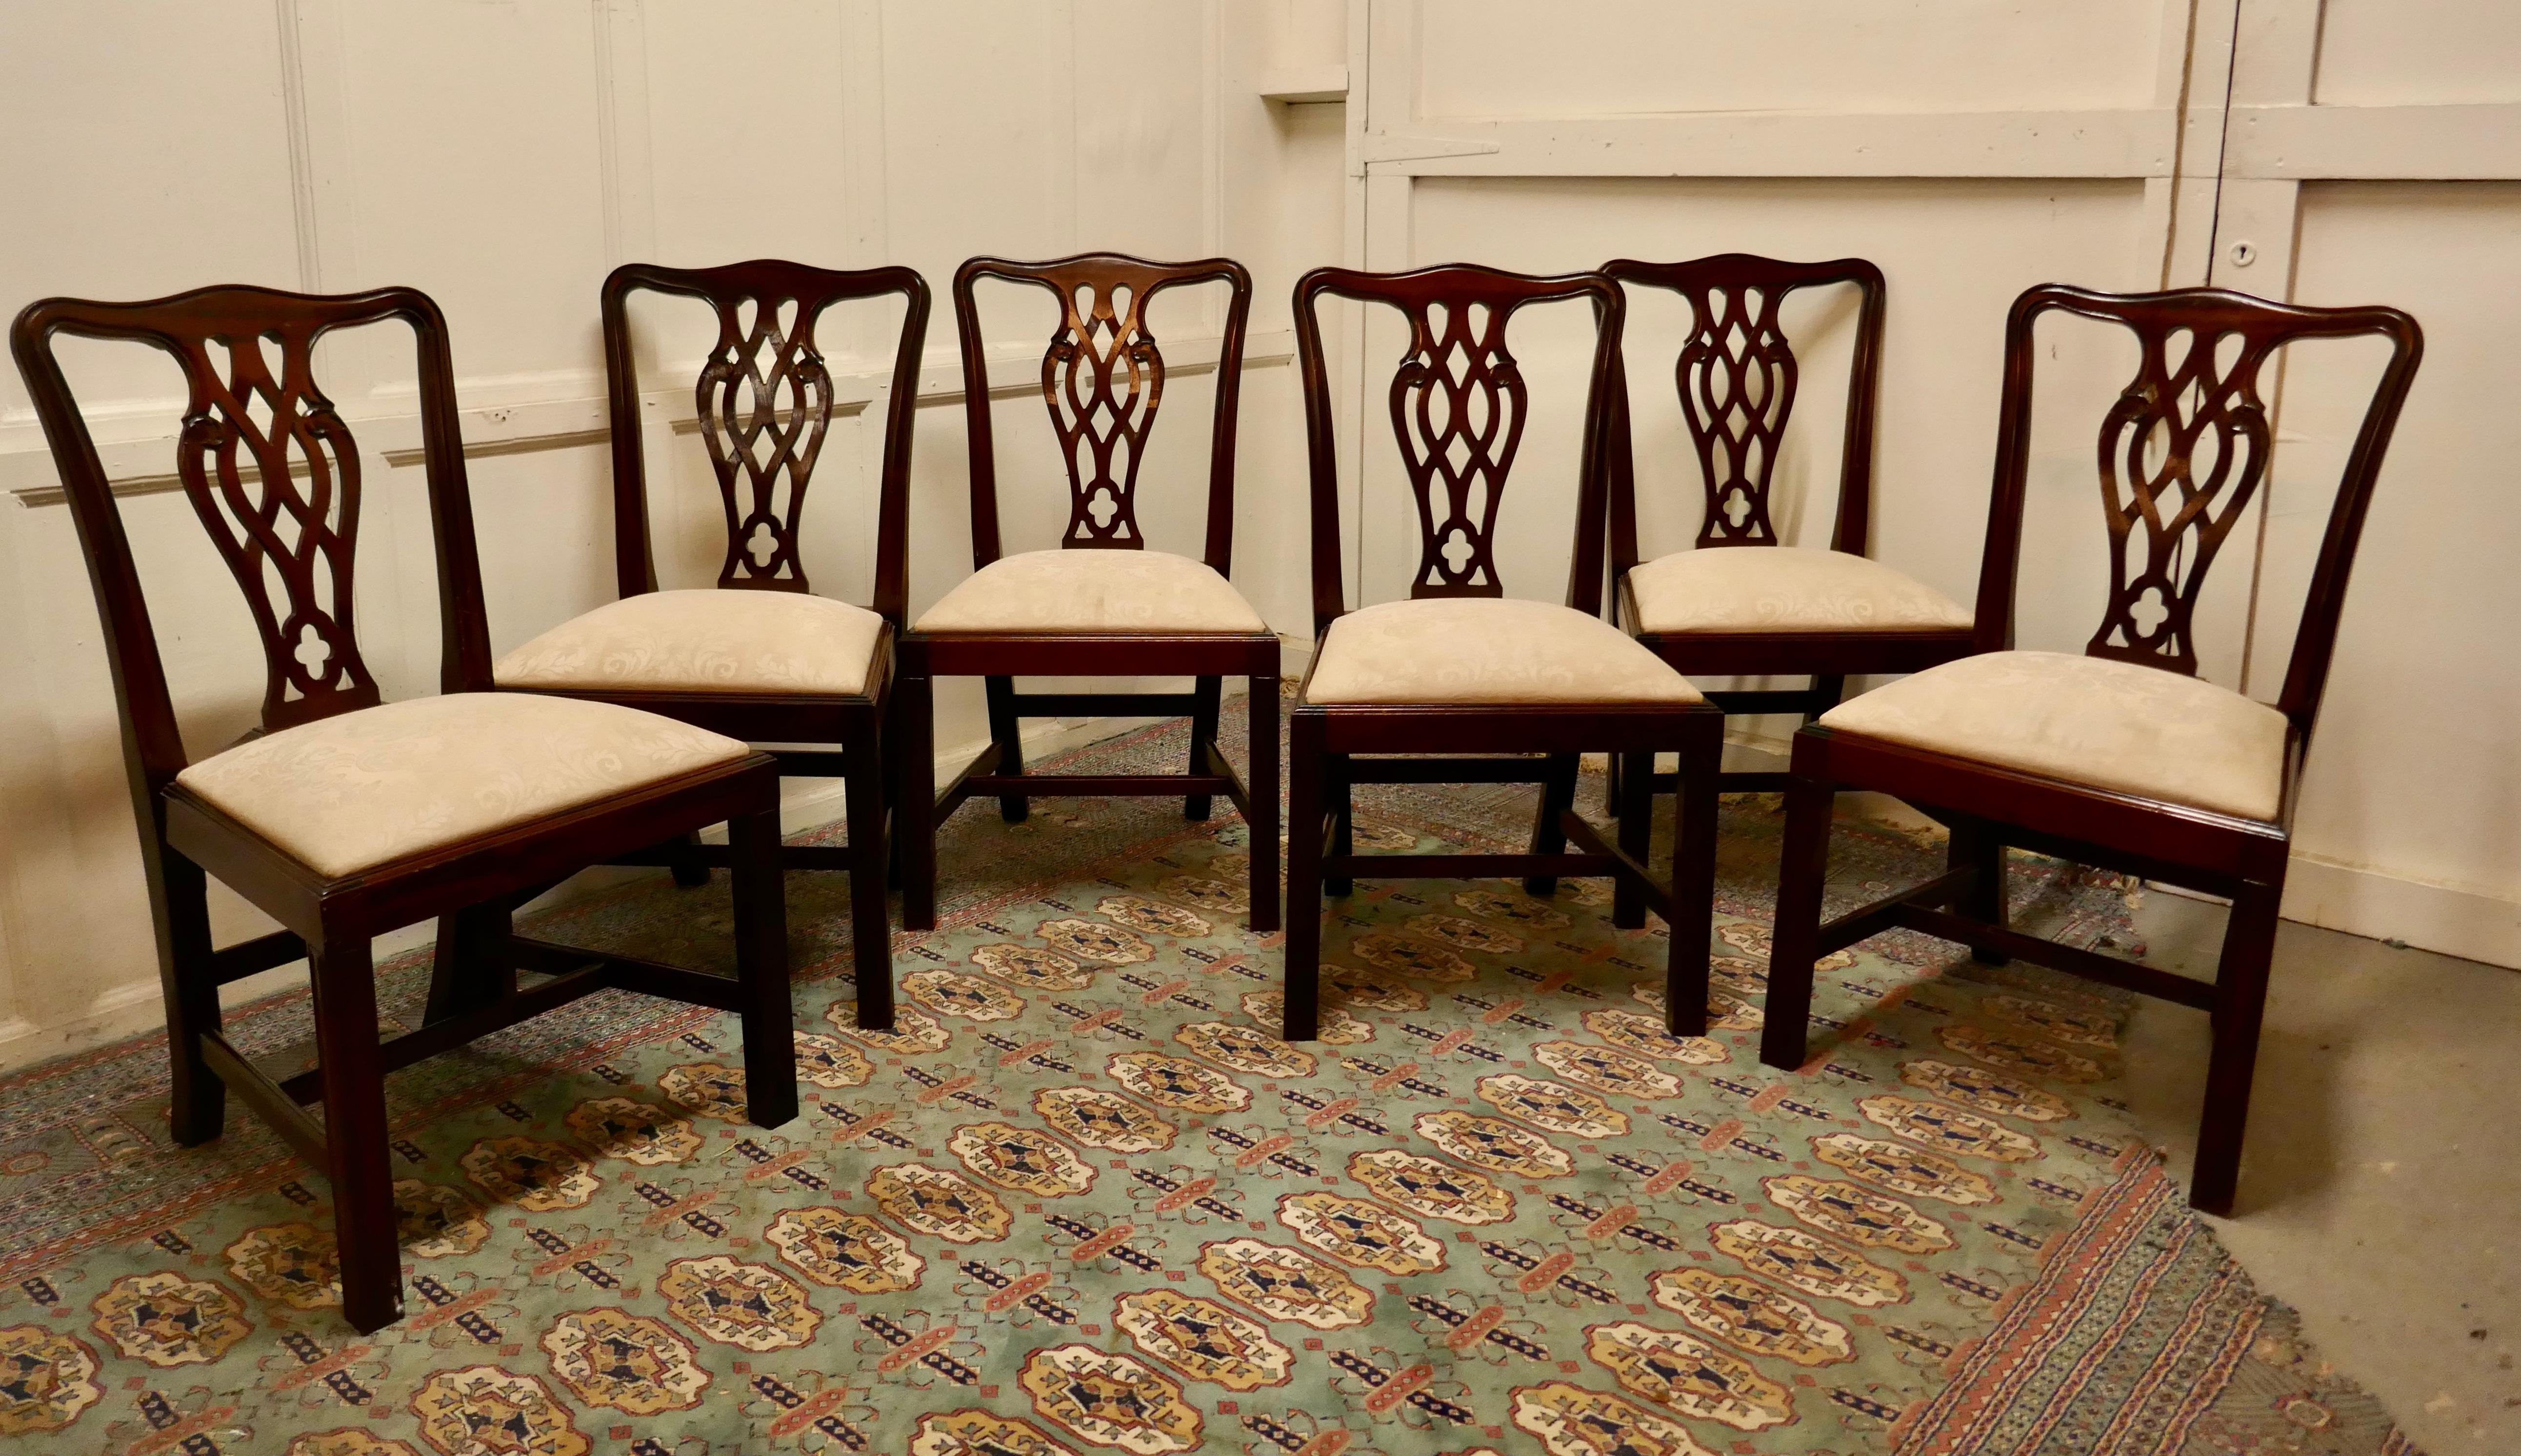 A Set of 6 Good Quality Chippendale Style Dining Chairs 

The chairs are a classic Georgian design they have a pierced Back Splat and are roomy and comfortable, the seats are the ‘drop in’ type and have cream brocade upholstery, they are used but